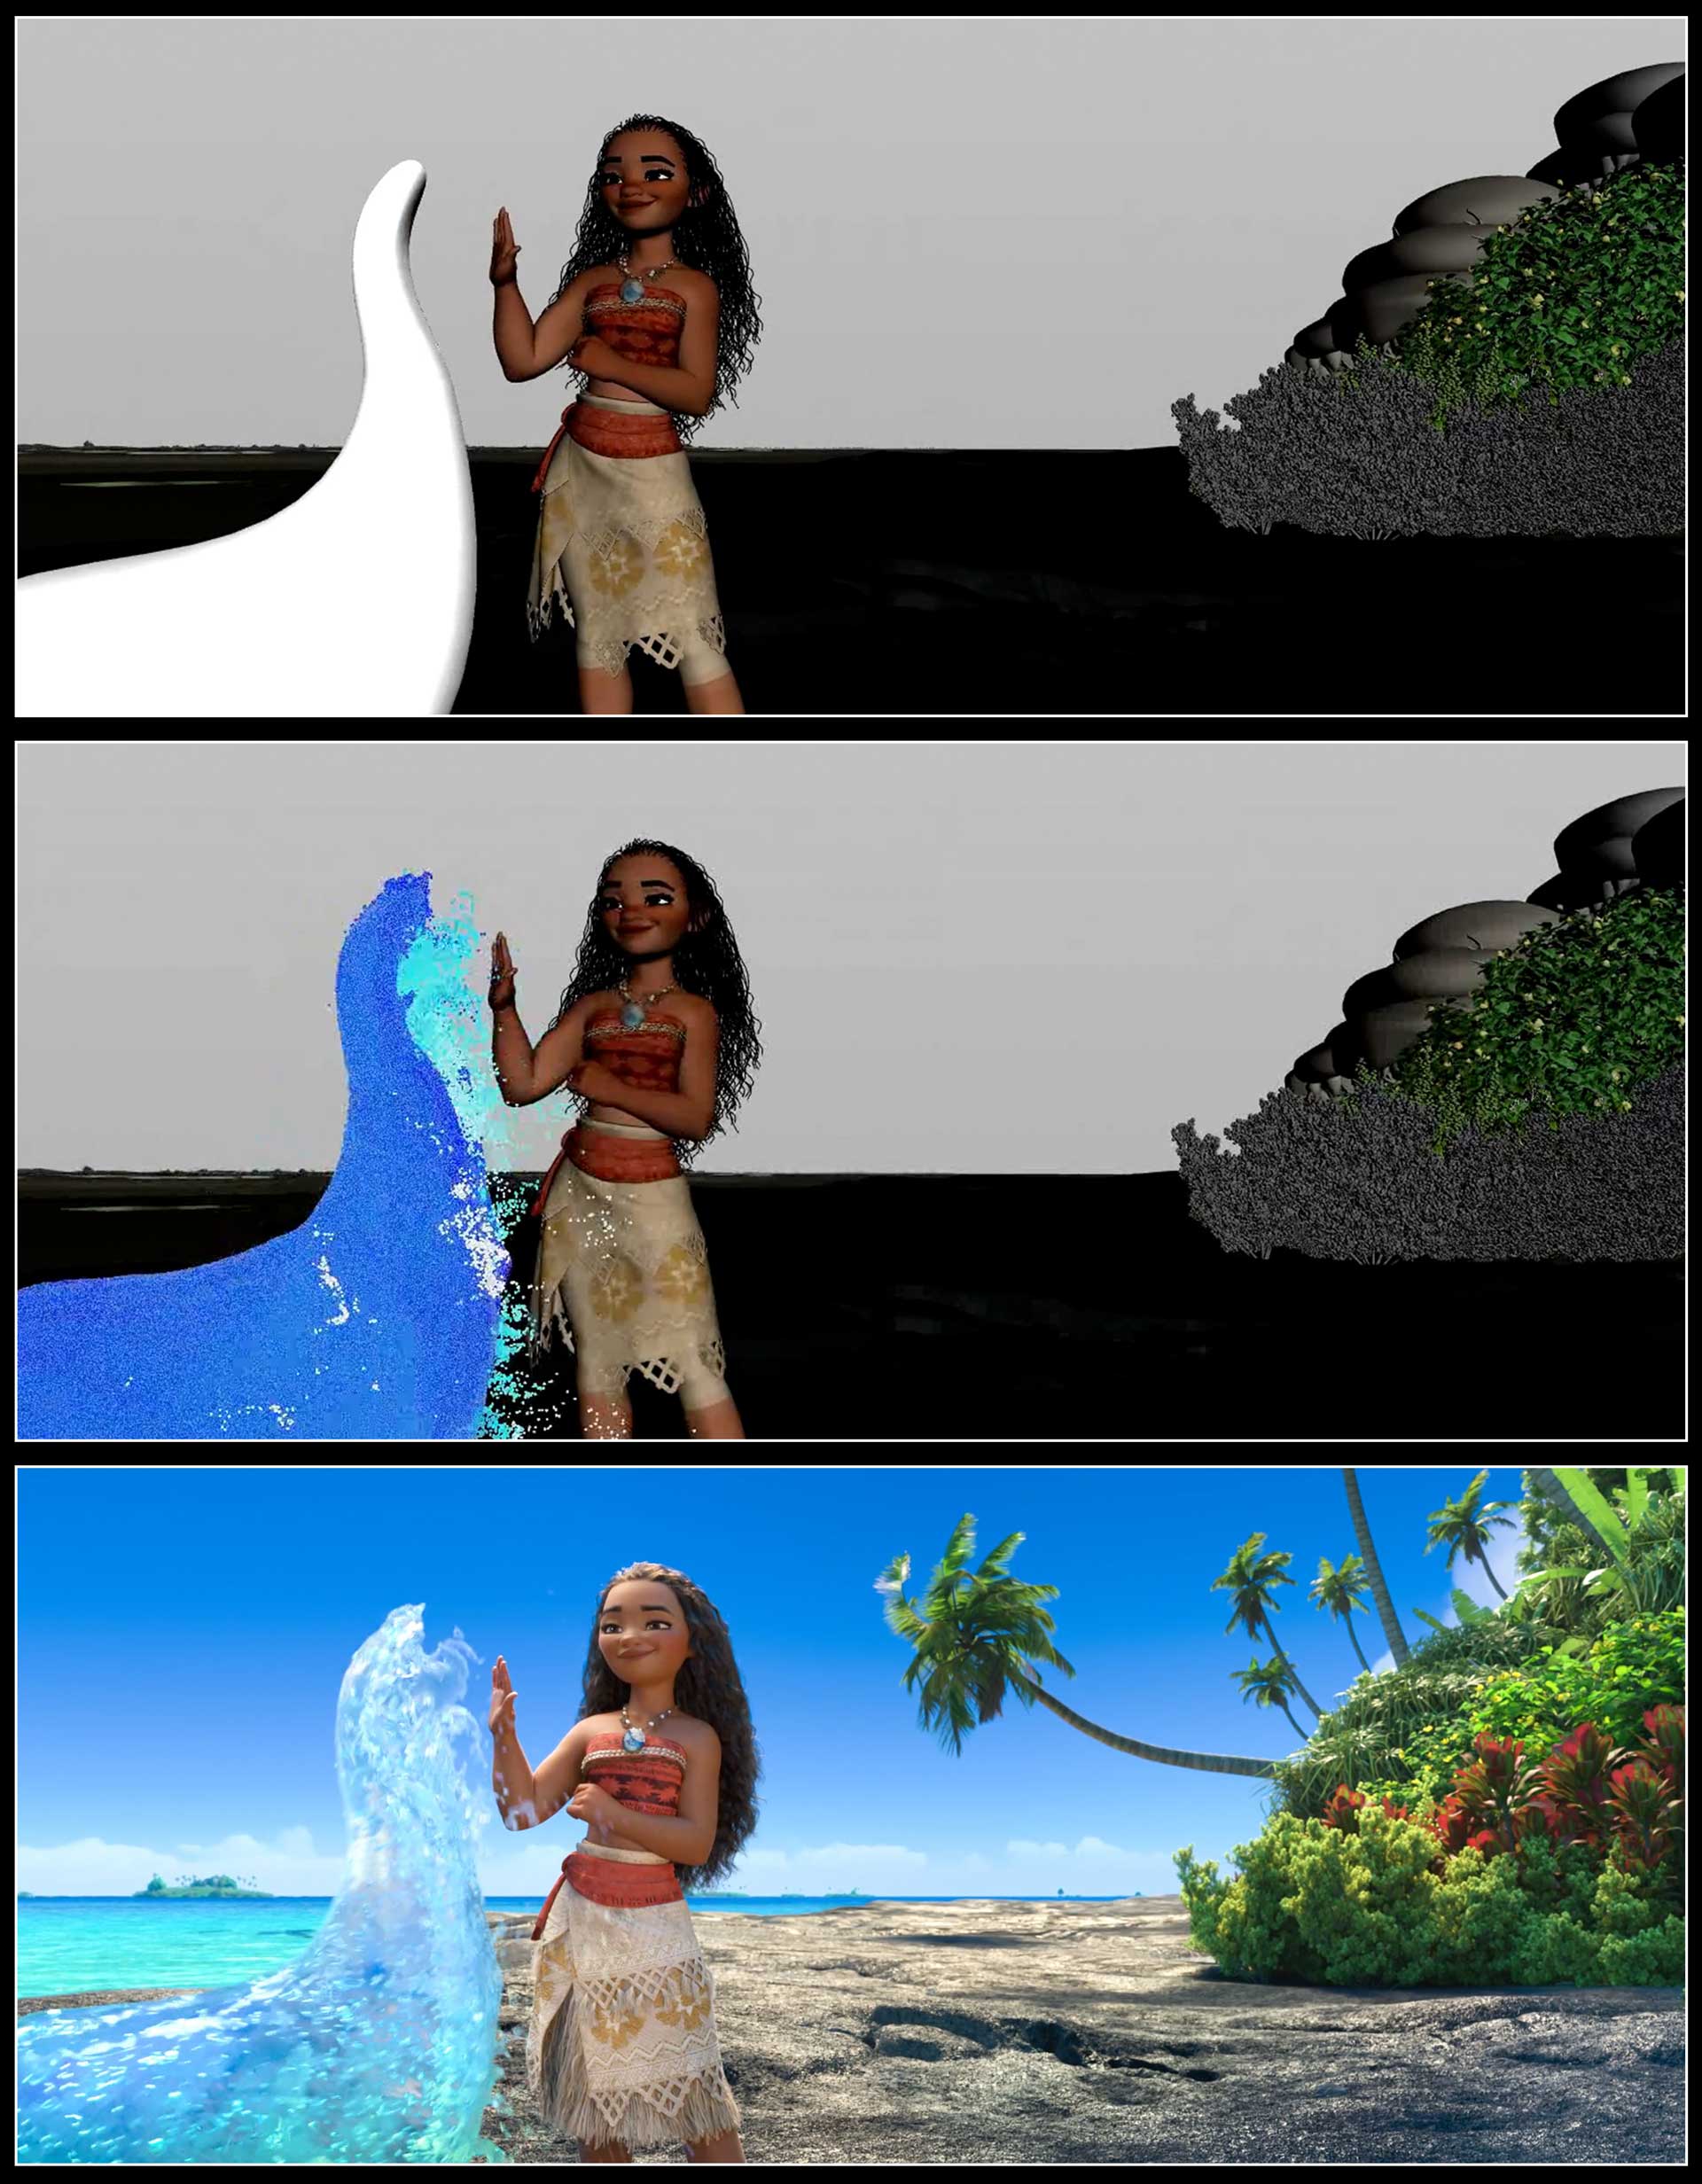 MOANA effects progression image, featuring Animation (top), Simulation (middle), and Render (bottom) passes.